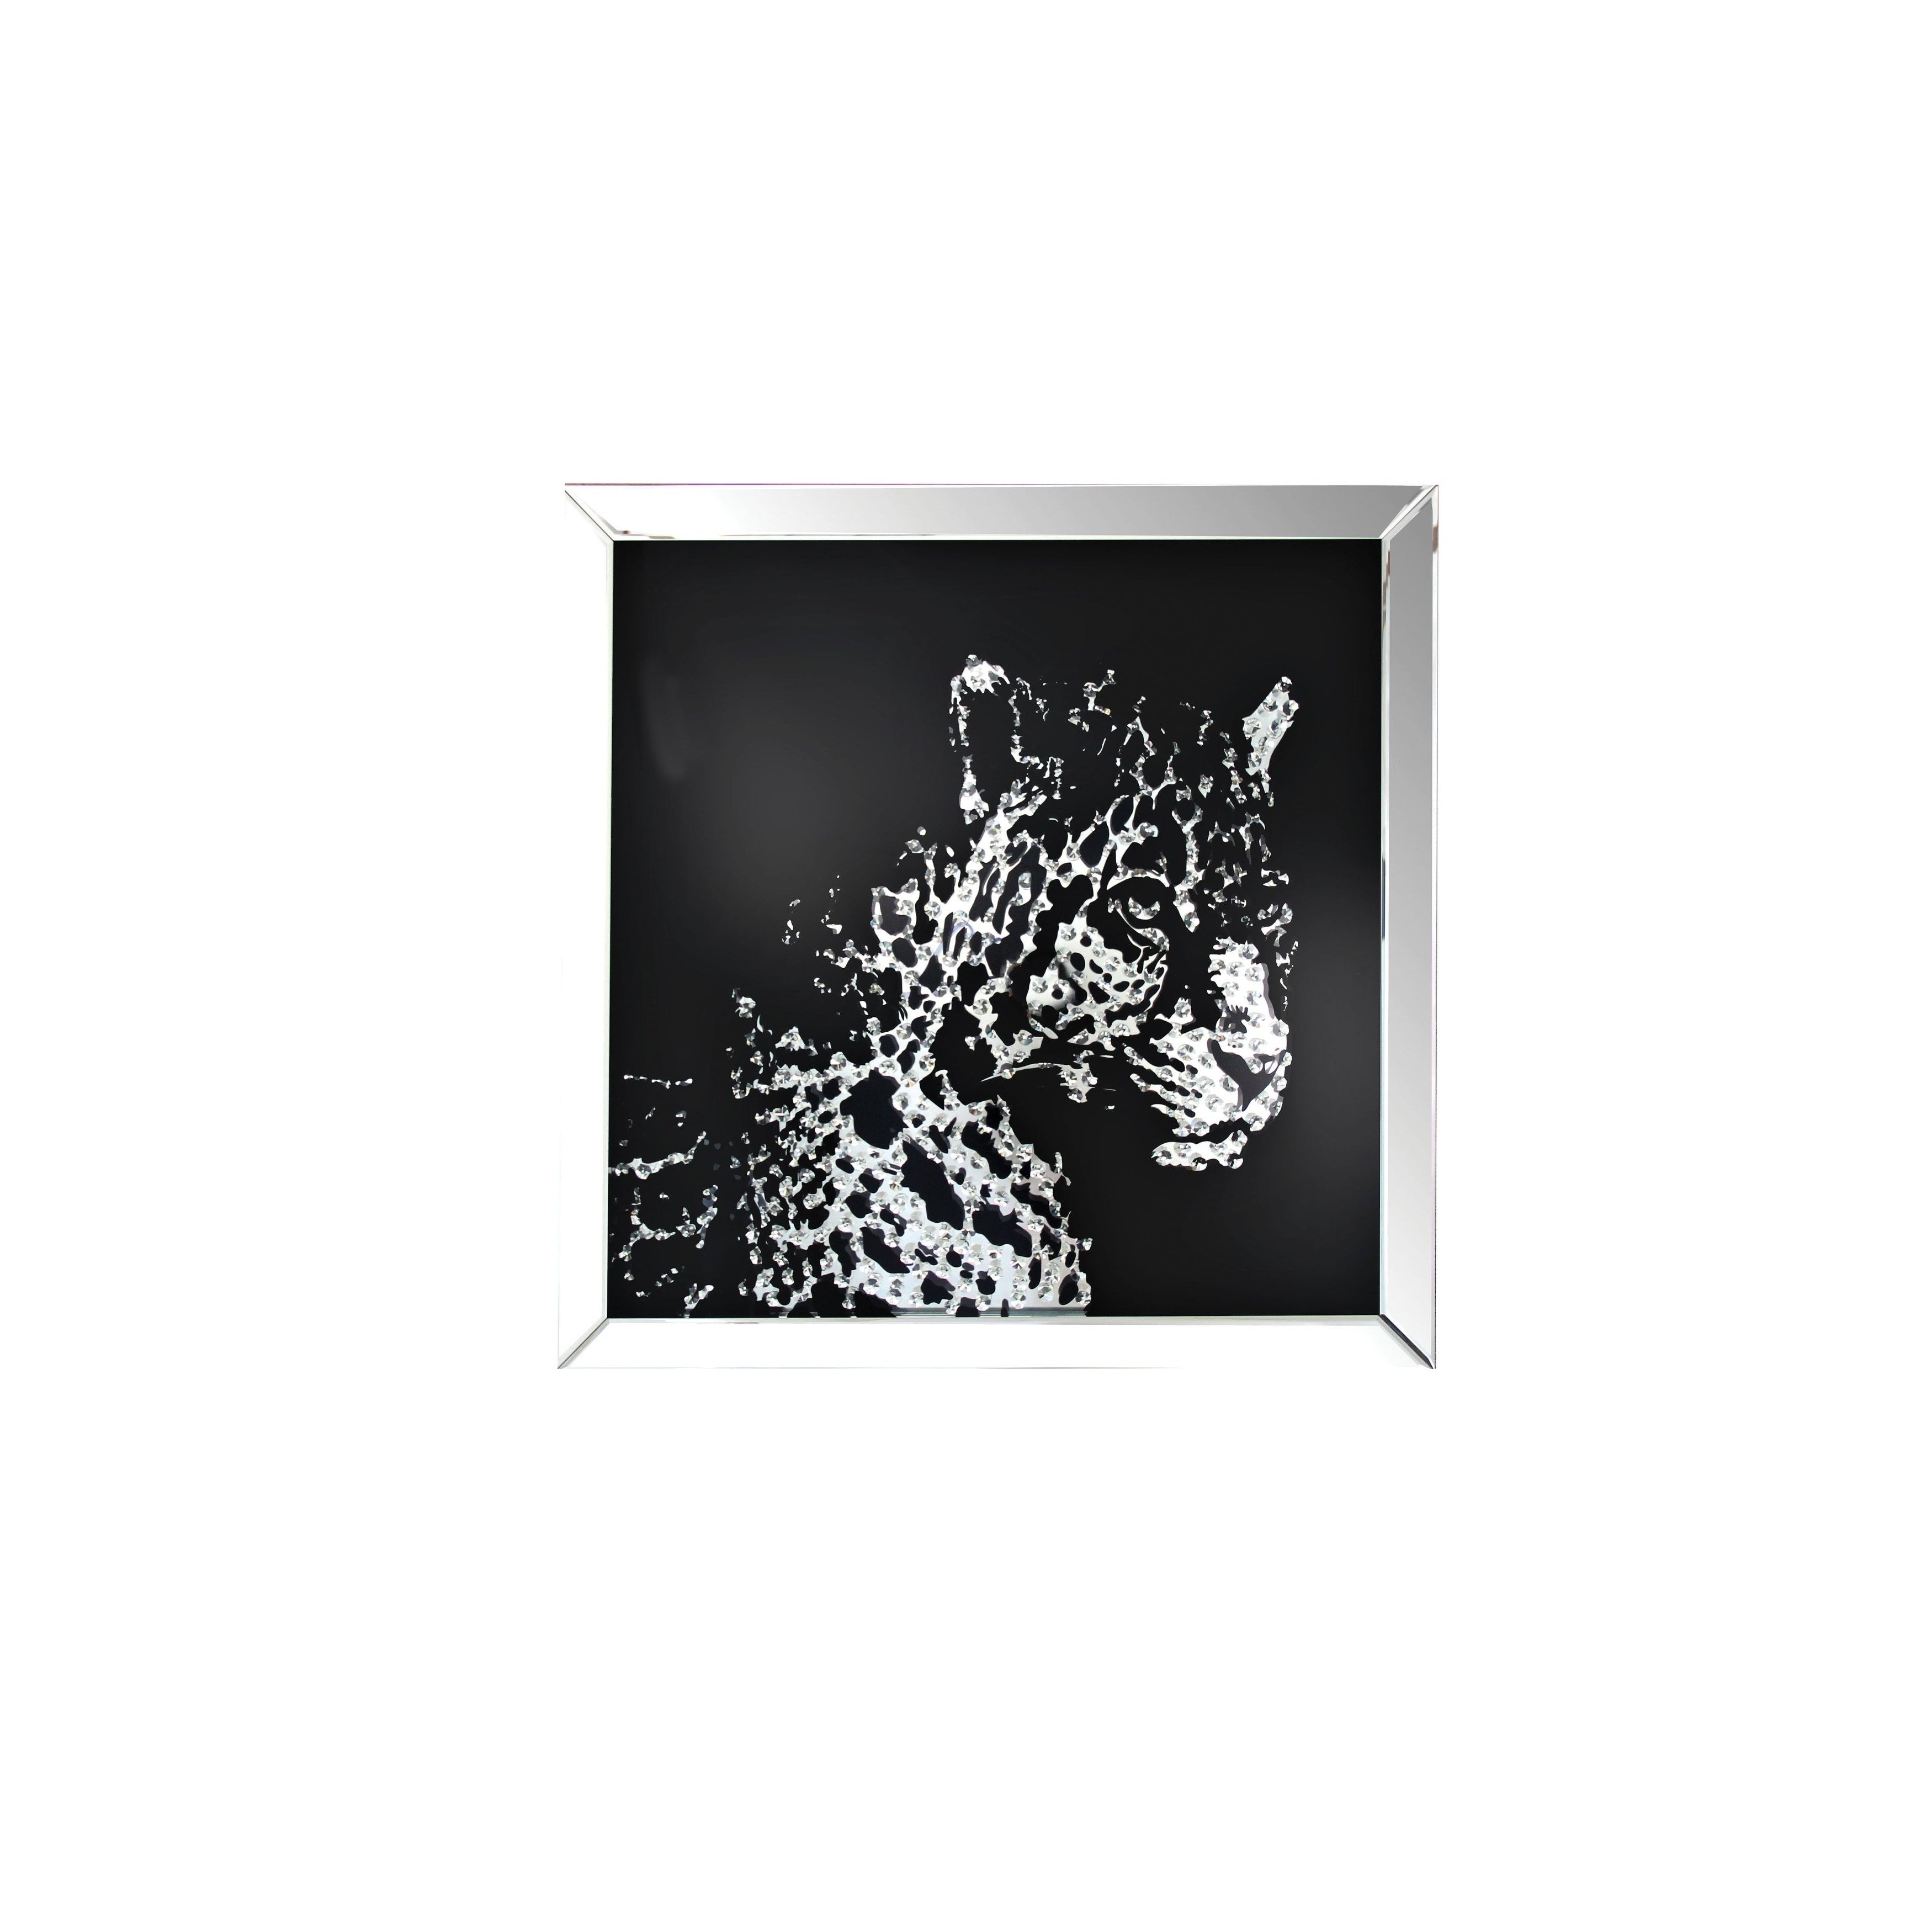 Square Shape Mirror Framed Leopard Wall Dï¿½cor With Crystal Inlays, Black  & Silver For Most Up To Date Leopard Wall Mirrors (View 8 of 20)